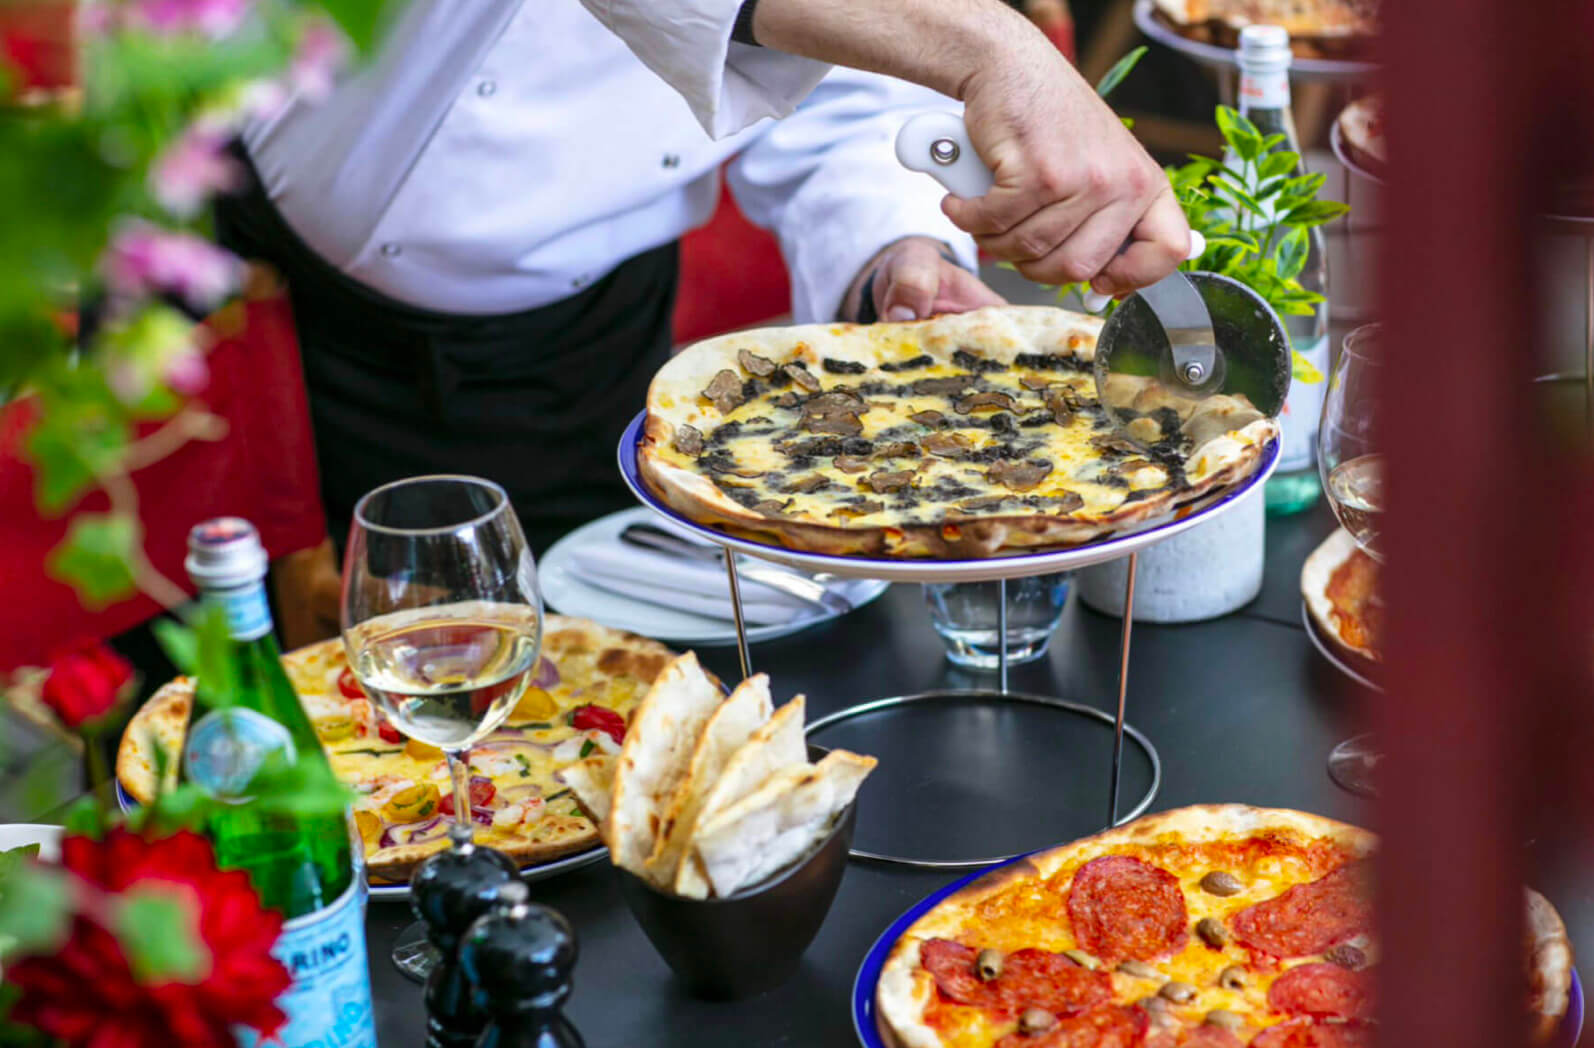 Crazy Pizza Marylebone - bringing Italian authenticity direct to your table